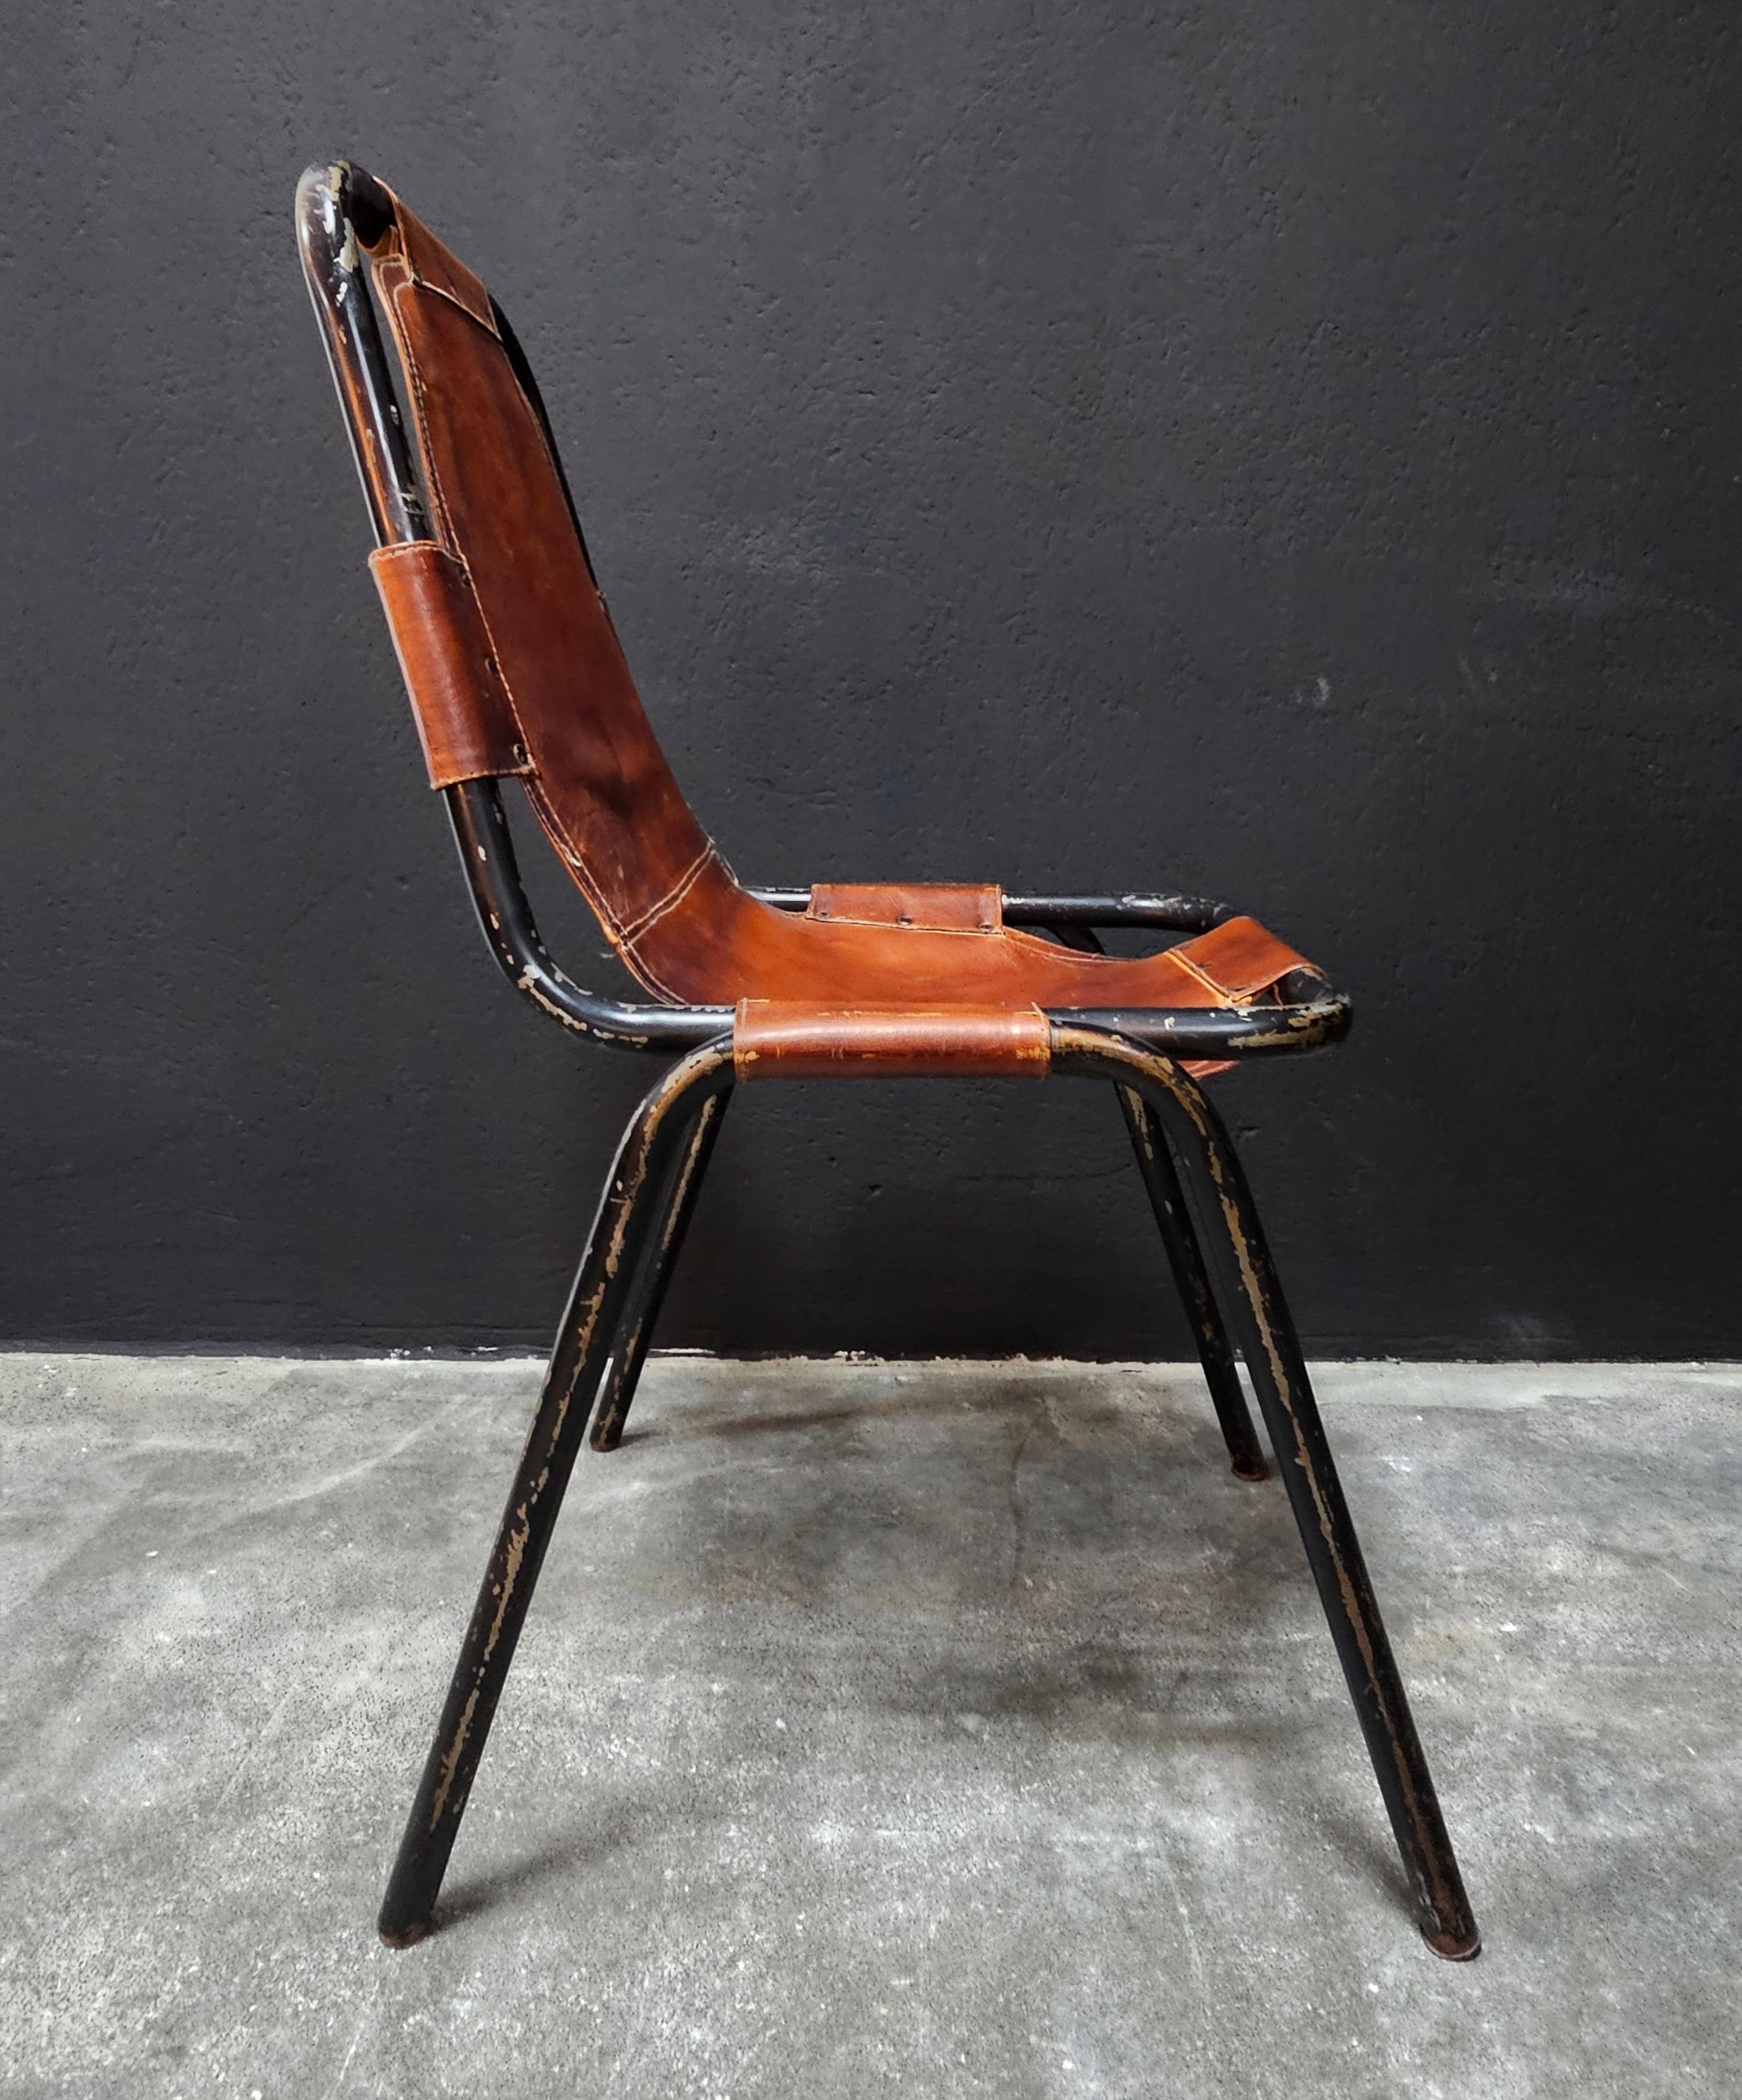 Bauhaus Set of 3 Leather Chairs by DalVera in style of Charlotte Perriand, France, 1950s For Sale